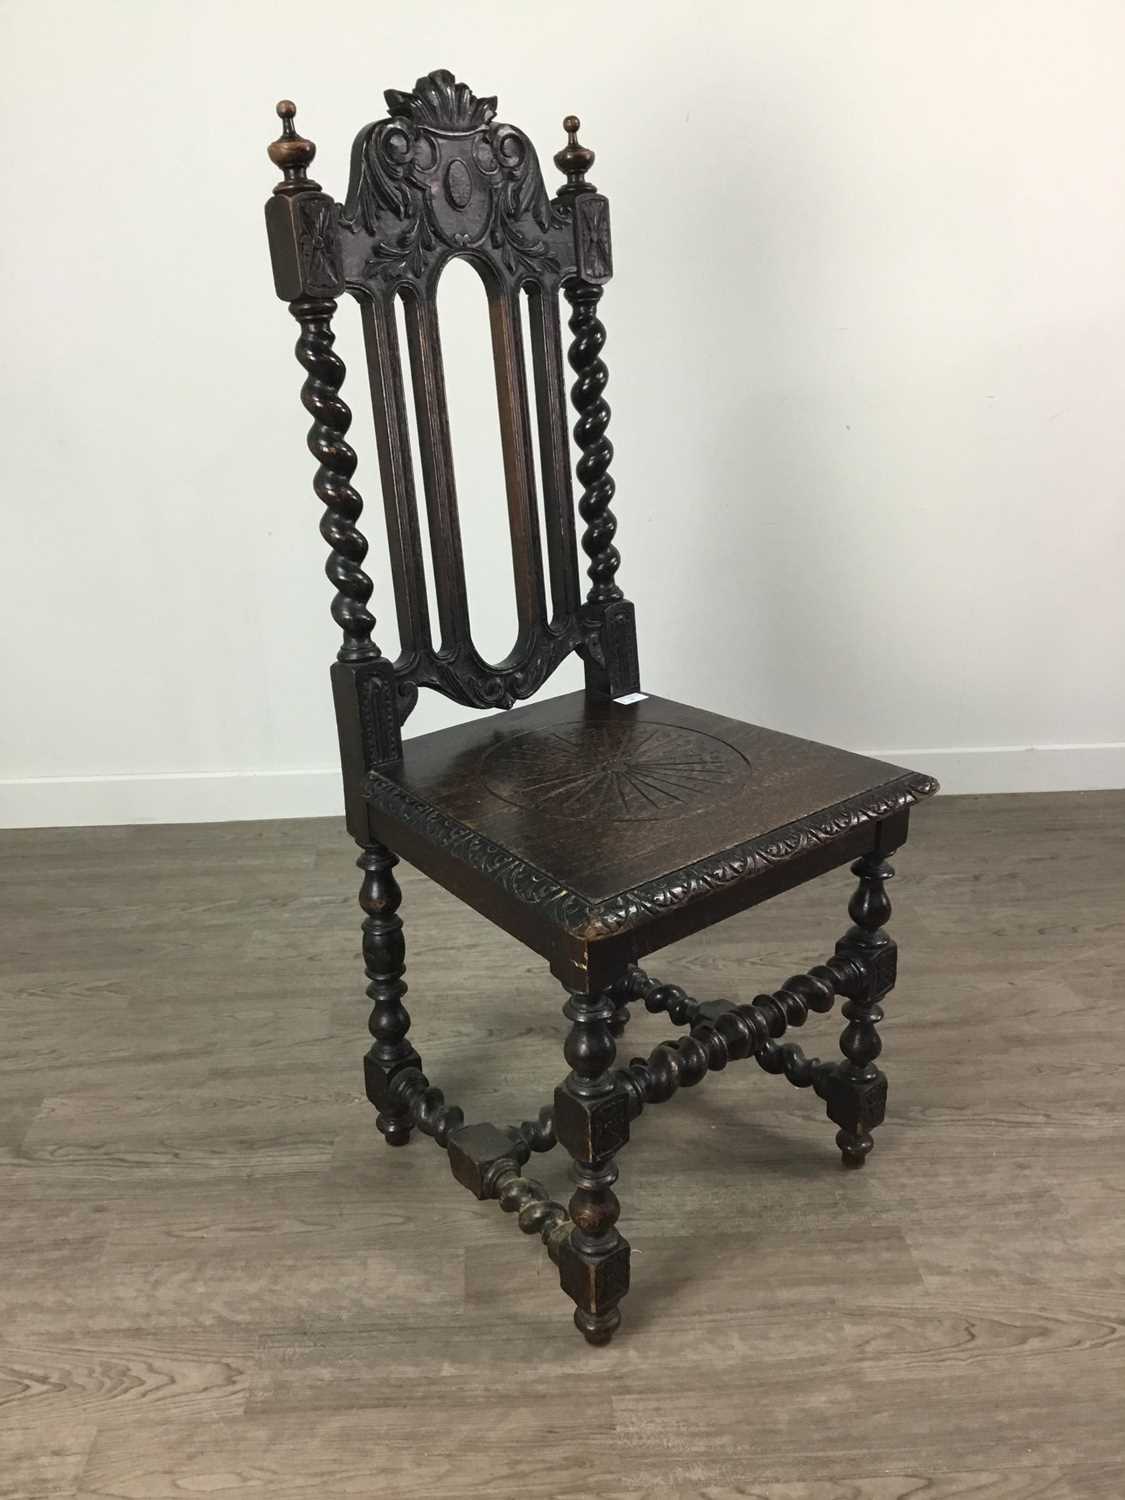 Lot 97 - A LATE 19TH CENTURY OAK HALL CHAIR